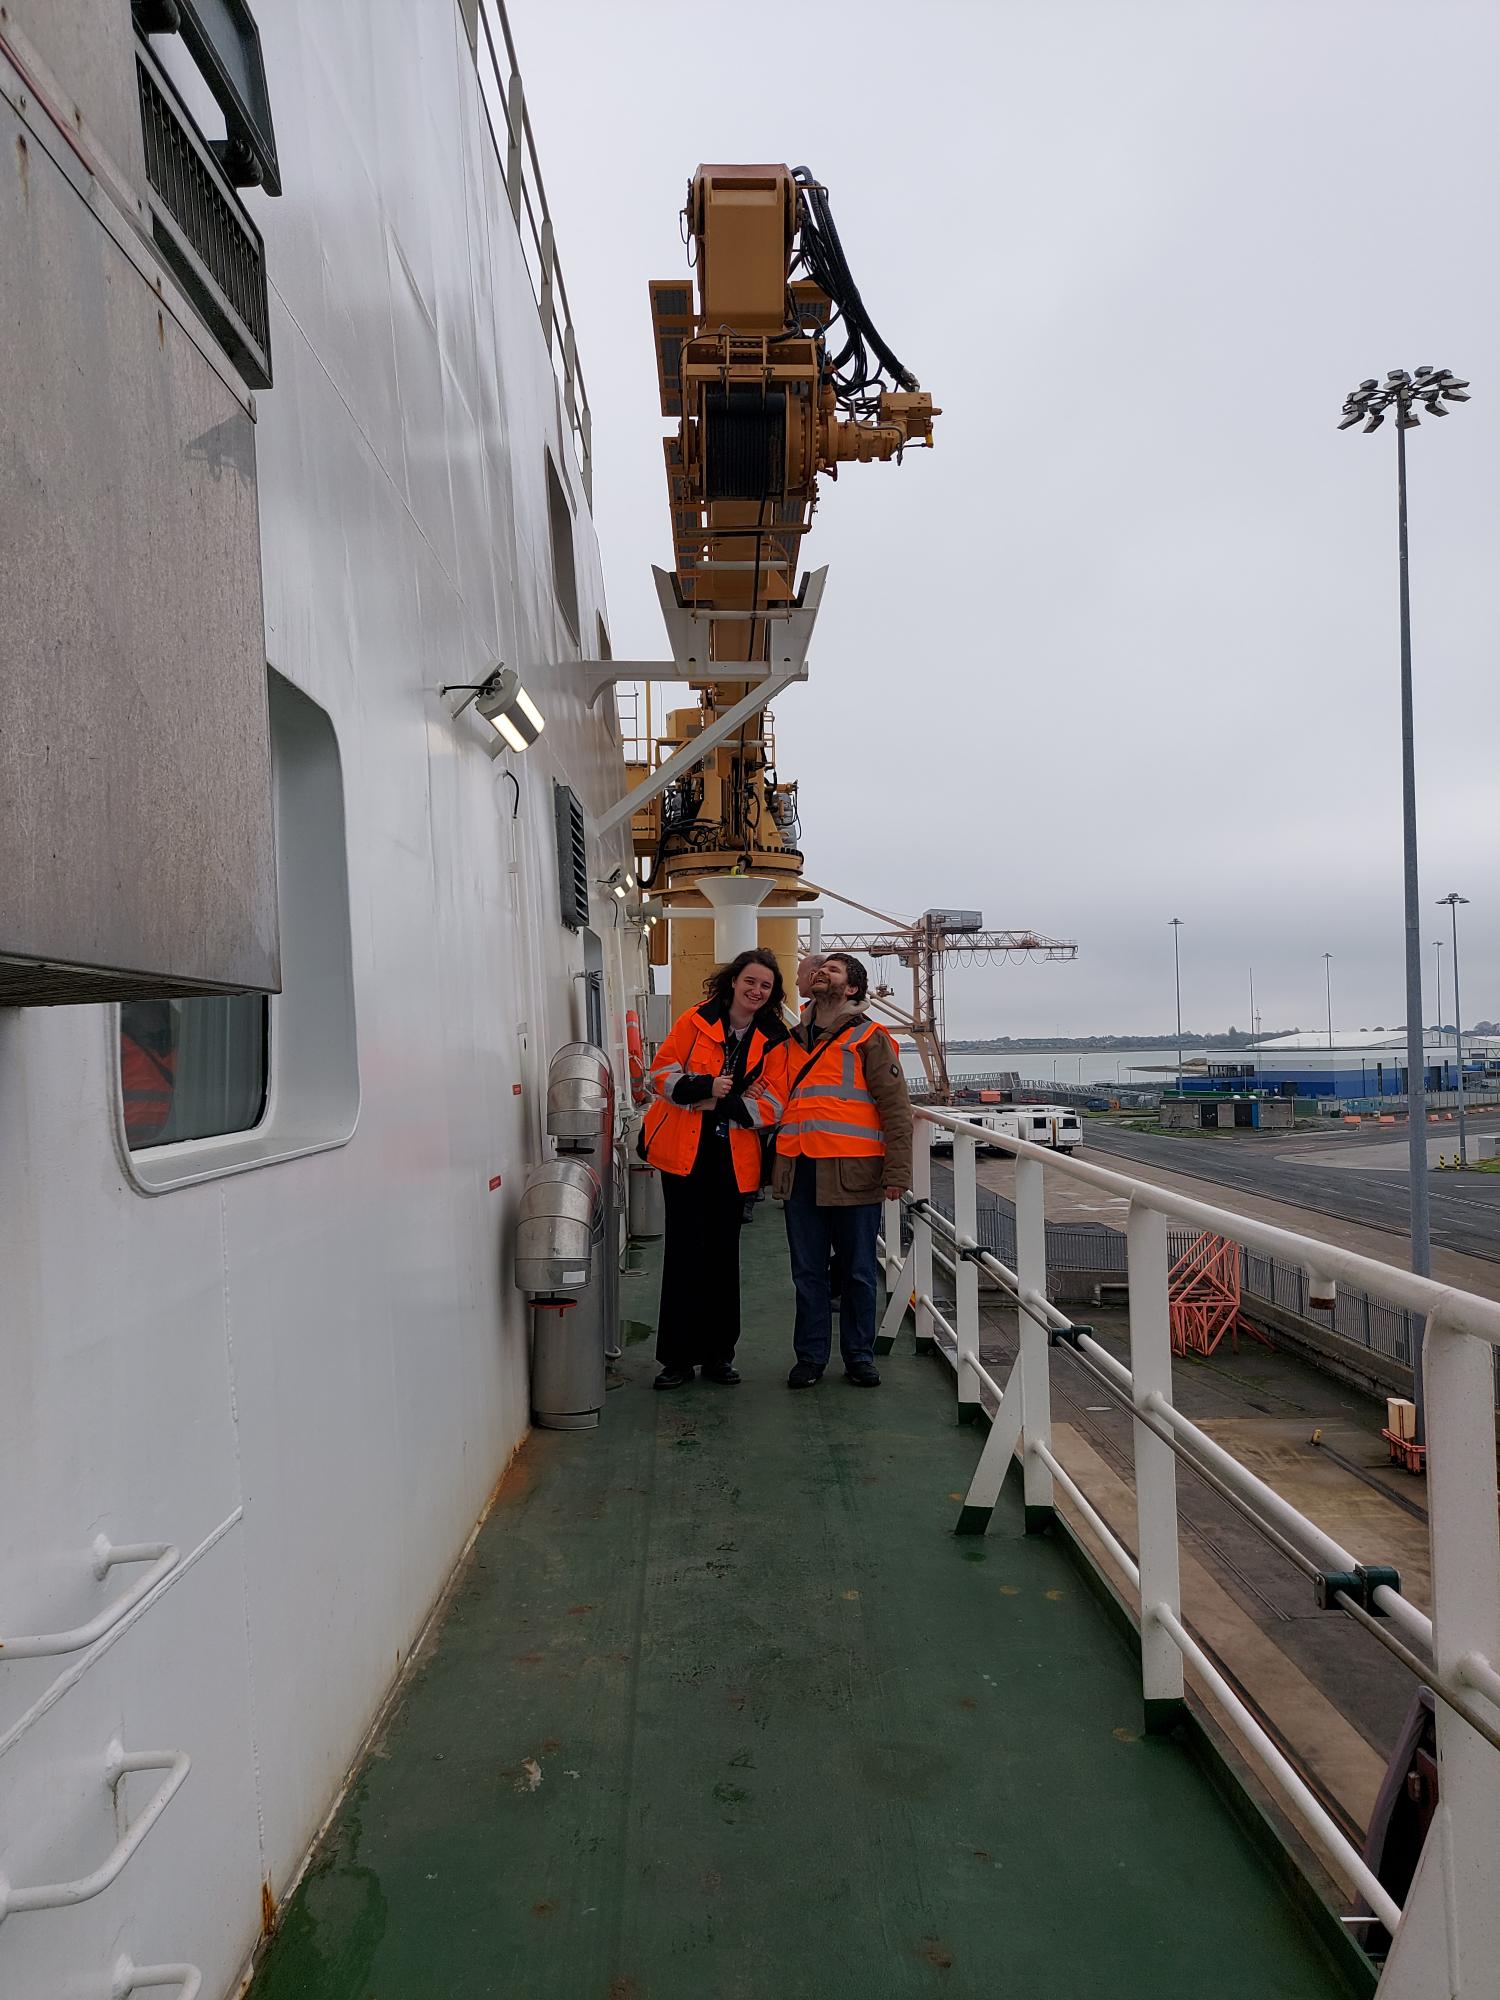 Two people wearing orange hi-vis jackets stand on the side of a ship. There is a large yellow crane behind them, the deck is green and there is a white rail to their left.